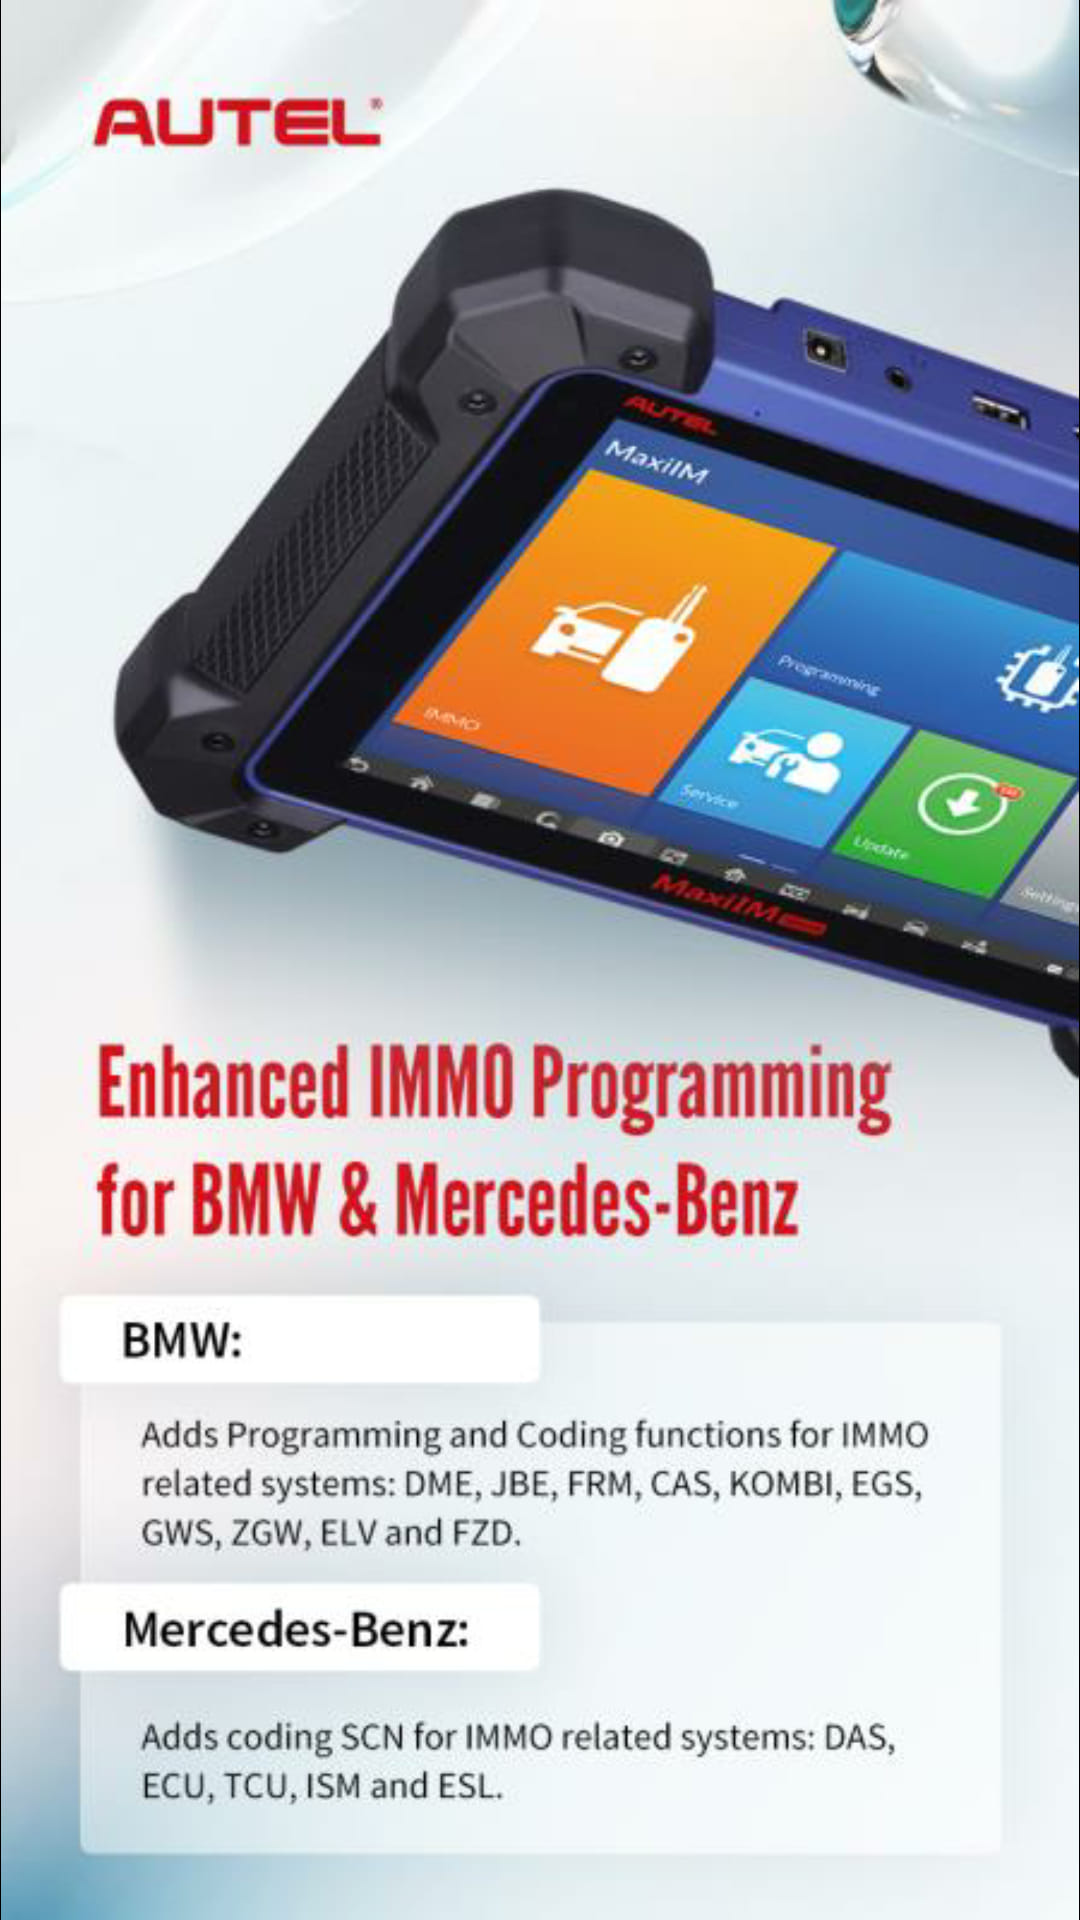 Autel IMMO function upgrade for BMW and Mercedes-Benz